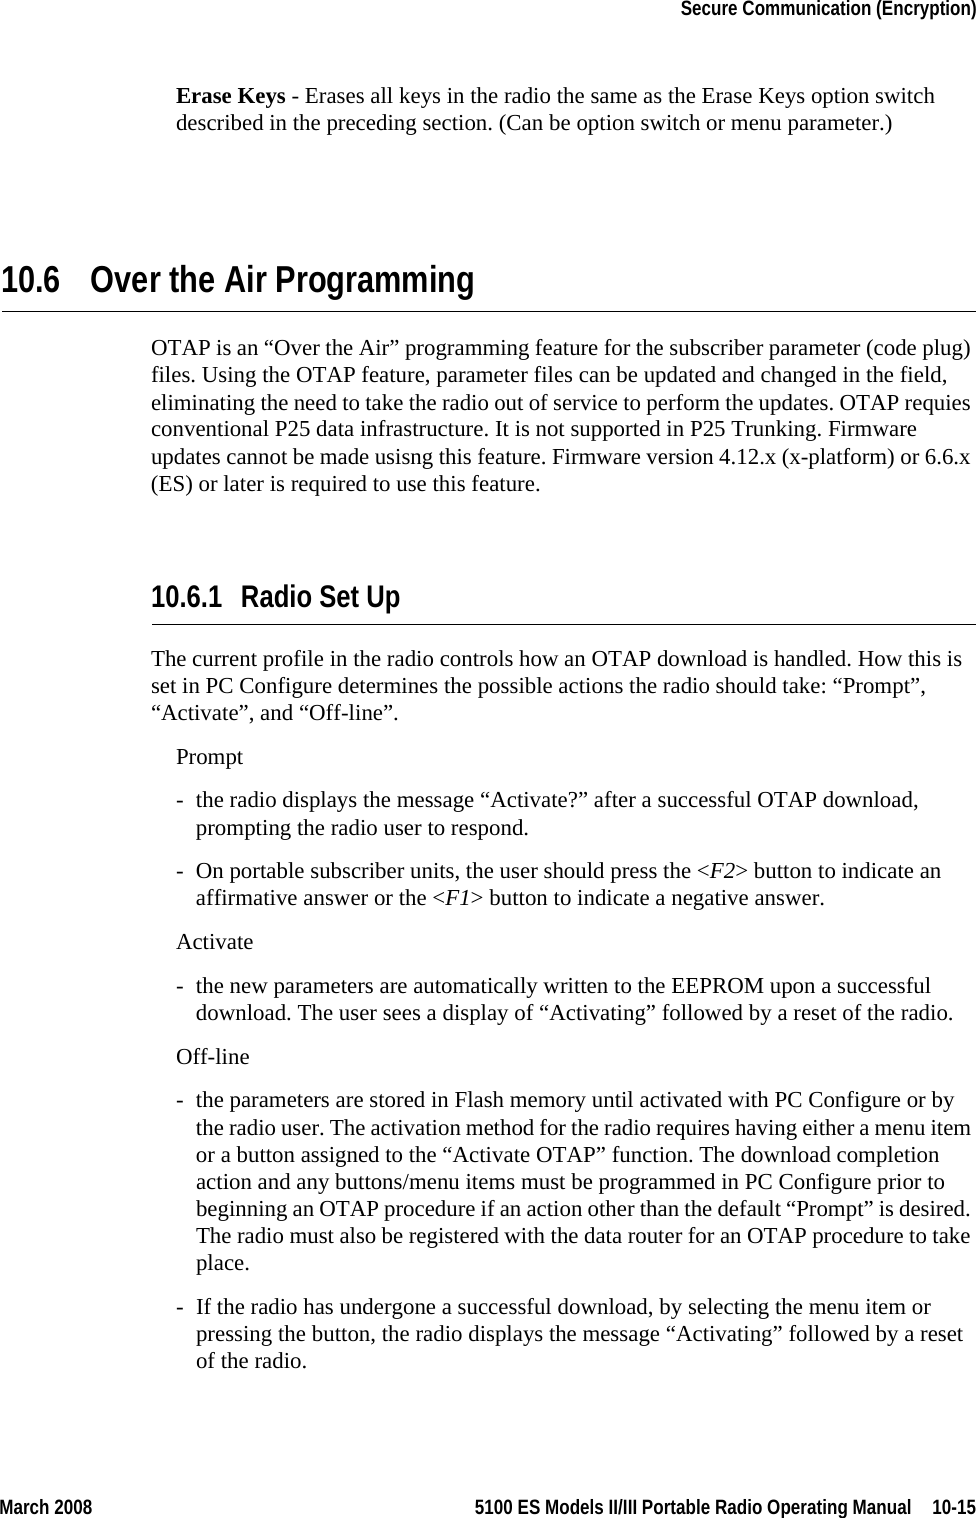 March 2008 5100 ES Models II/III Portable Radio Operating Manual  10-15Secure Communication (Encryption)Erase Keys - Erases all keys in the radio the same as the Erase Keys option switch described in the preceding section. (Can be option switch or menu parameter.)10.6 Over the Air ProgrammingOTAP is an “Over the Air” programming feature for the subscriber parameter (code plug) files. Using the OTAP feature, parameter files can be updated and changed in the field, eliminating the need to take the radio out of service to perform the updates. OTAP requies conventional P25 data infrastructure. It is not supported in P25 Trunking. Firmware updates cannot be made usisng this feature. Firmware version 4.12.x (x-platform) or 6.6.x (ES) or later is required to use this feature.10.6.1 Radio Set Up The current profile in the radio controls how an OTAP download is handled. How this is set in PC Configure determines the possible actions the radio should take: “Prompt”, “Activate”, and “Off-line”.Prompt- the radio displays the message “Activate?” after a successful OTAP download, prompting the radio user to respond. - On portable subscriber units, the user should press the &lt;F2&gt; button to indicate an affirmative answer or the &lt;F1&gt; button to indicate a negative answer.Activate- the new parameters are automatically written to the EEPROM upon a successful download. The user sees a display of “Activating” followed by a reset of the radio.Off-line- the parameters are stored in Flash memory until activated with PC Configure or by the radio user. The activation method for the radio requires having either a menu item or a button assigned to the “Activate OTAP” function. The download completion action and any buttons/menu items must be programmed in PC Configure prior to beginning an OTAP procedure if an action other than the default “Prompt” is desired. The radio must also be registered with the data router for an OTAP procedure to take place.  - If the radio has undergone a successful download, by selecting the menu item or pressing the button, the radio displays the message “Activating” followed by a reset of the radio.